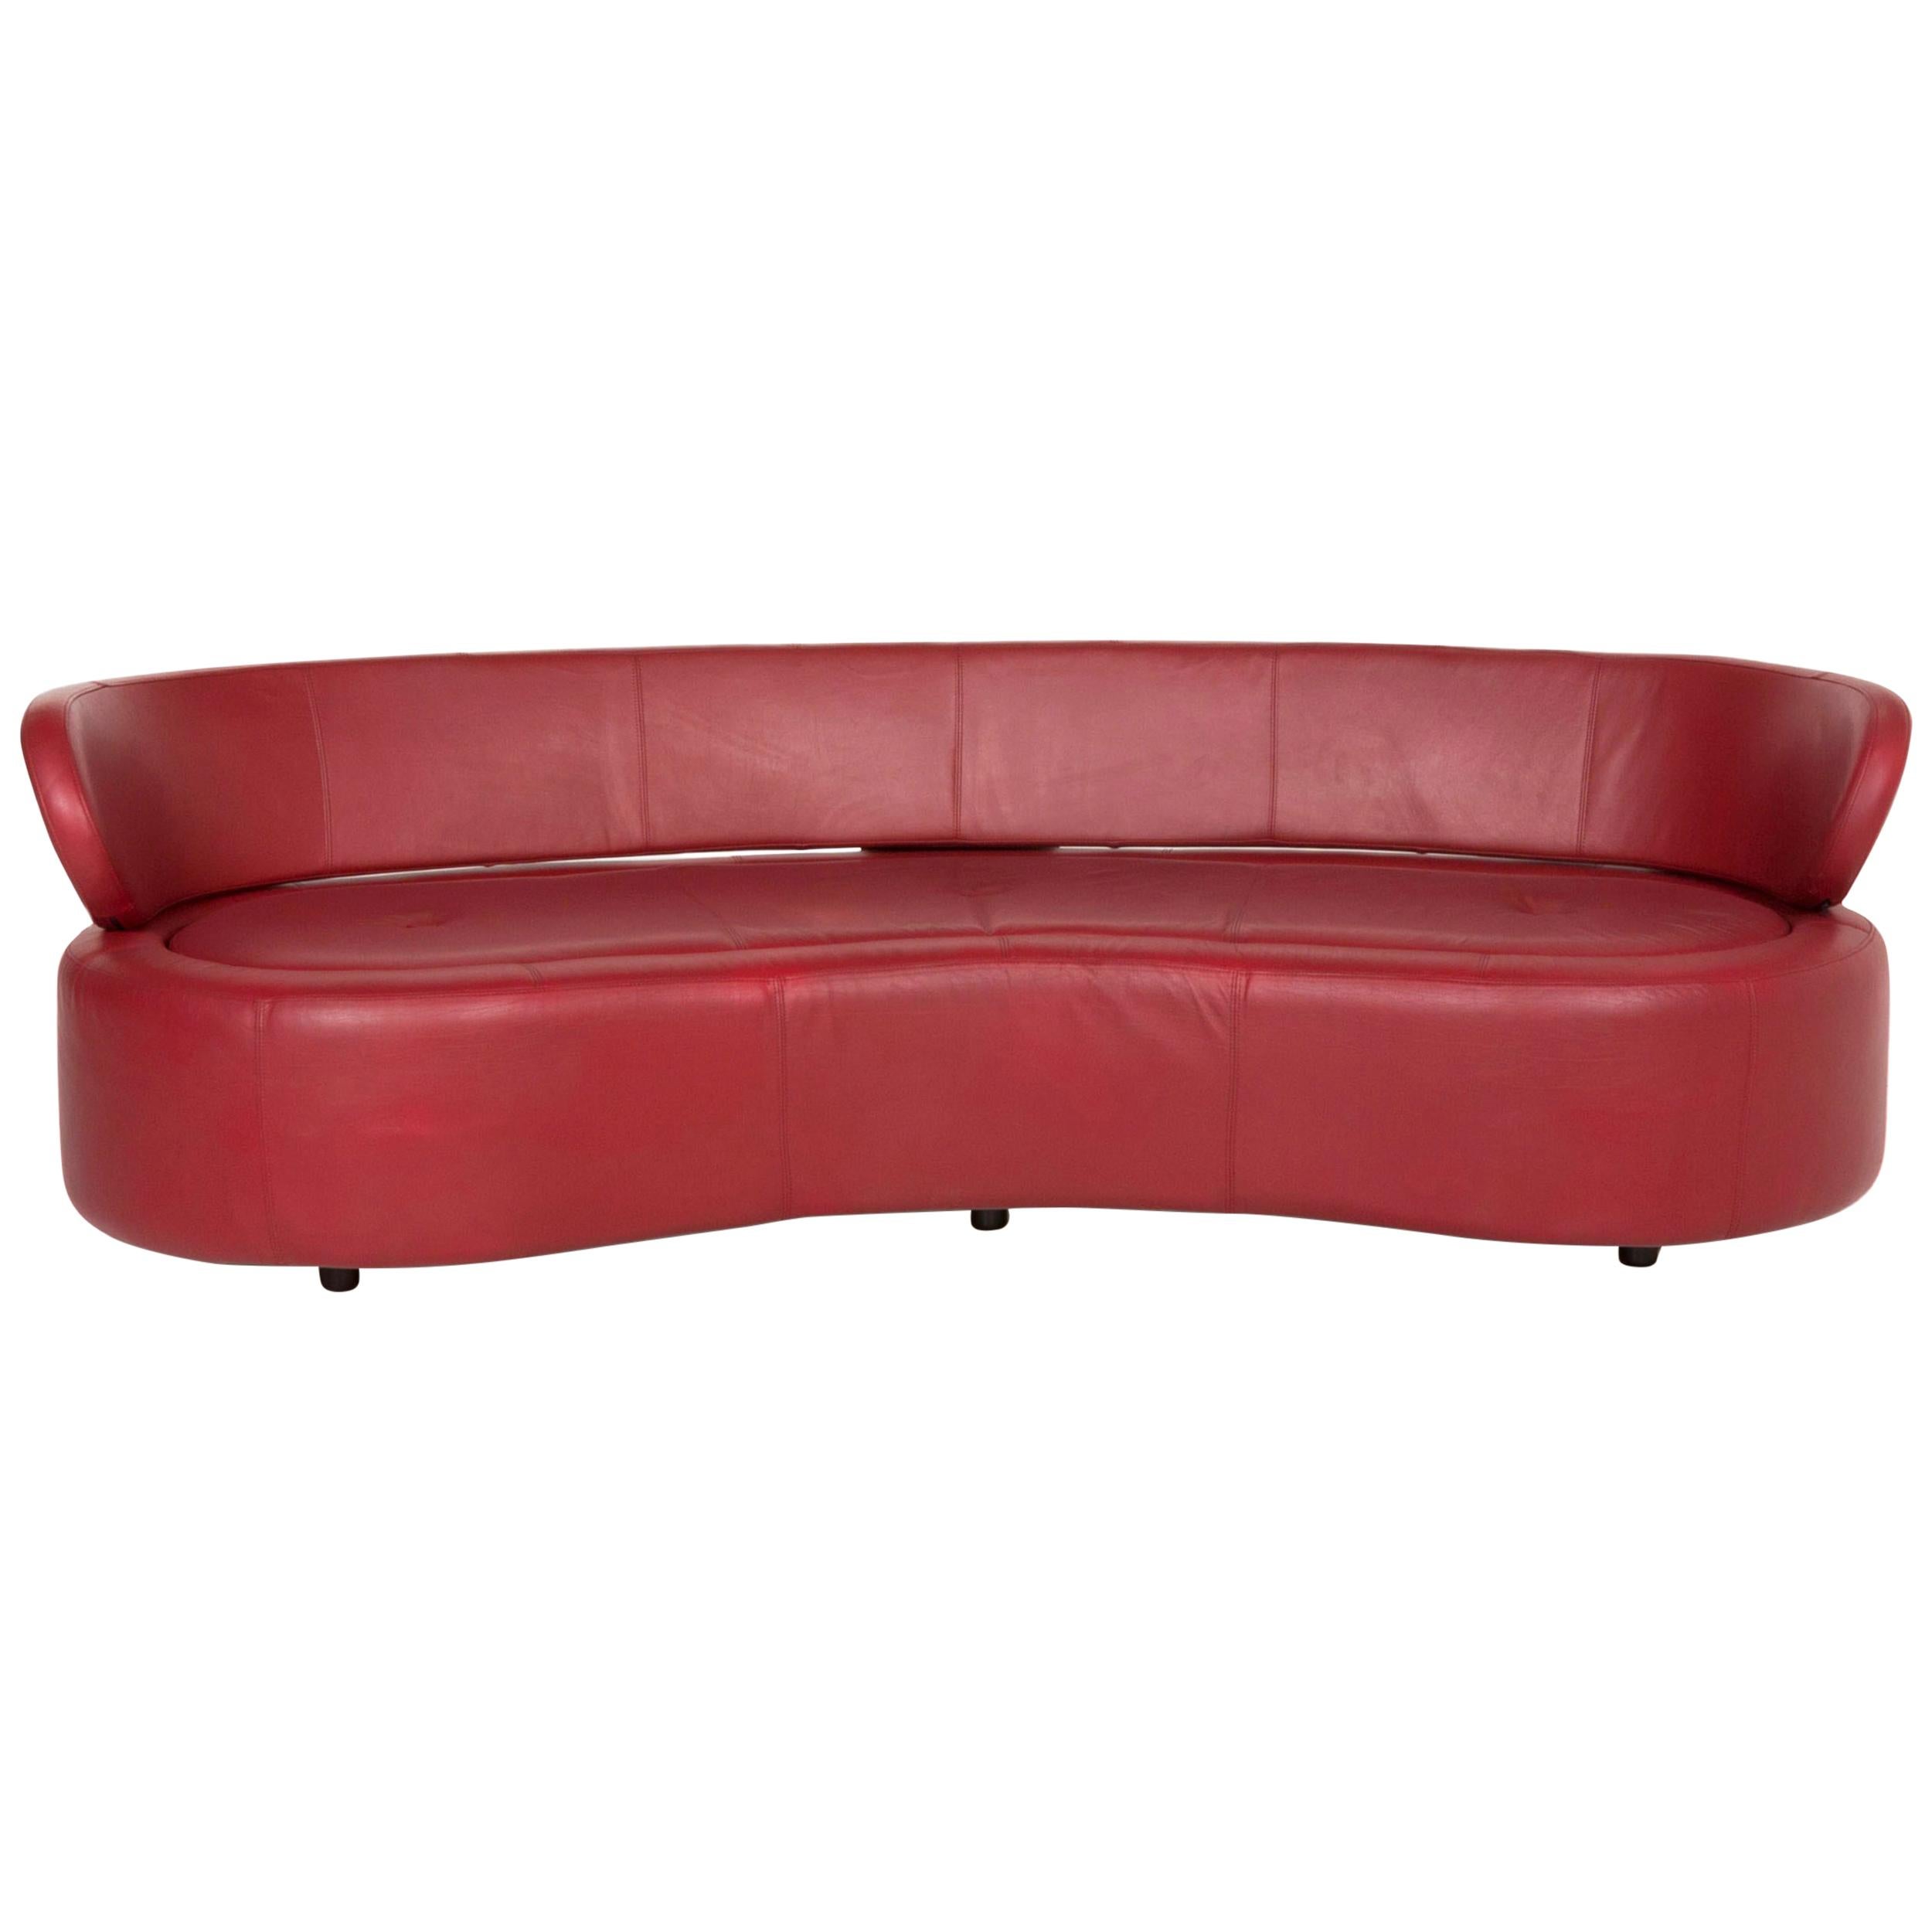 Boconcept Alpha Leather Sofa Red Two-Seat For Sale